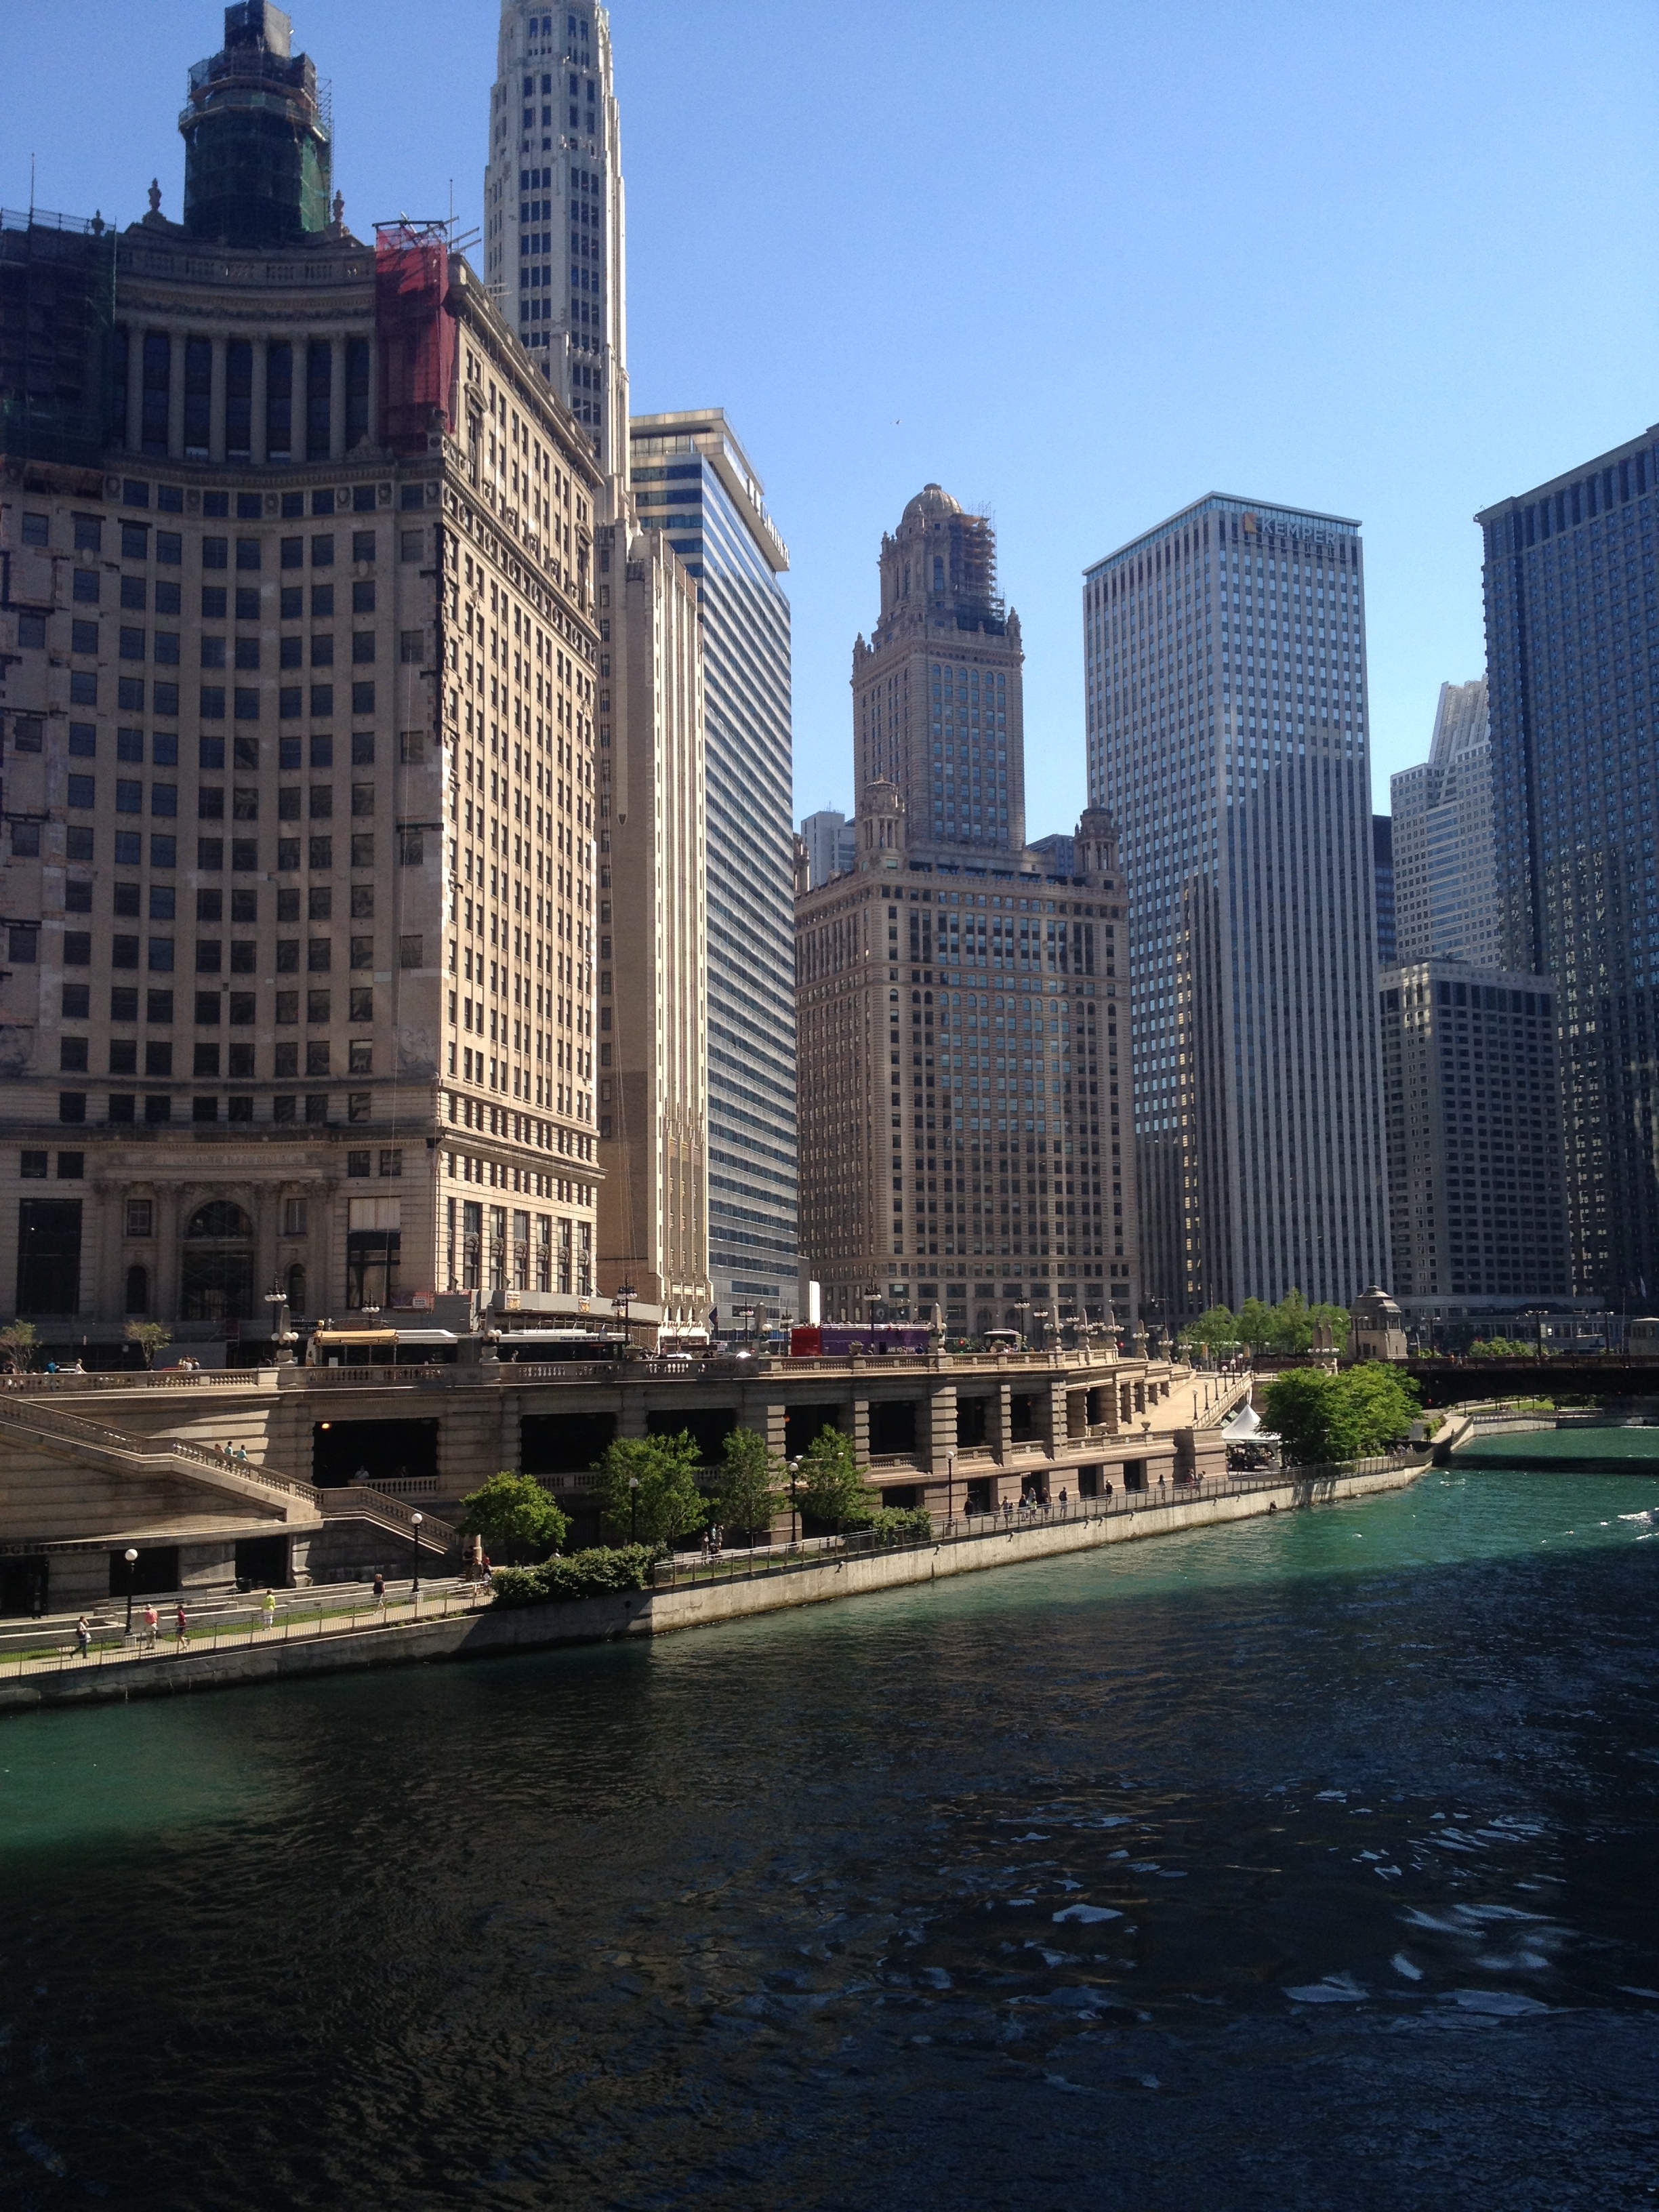 Being in beautiful downtown Chicago is a definite perk!